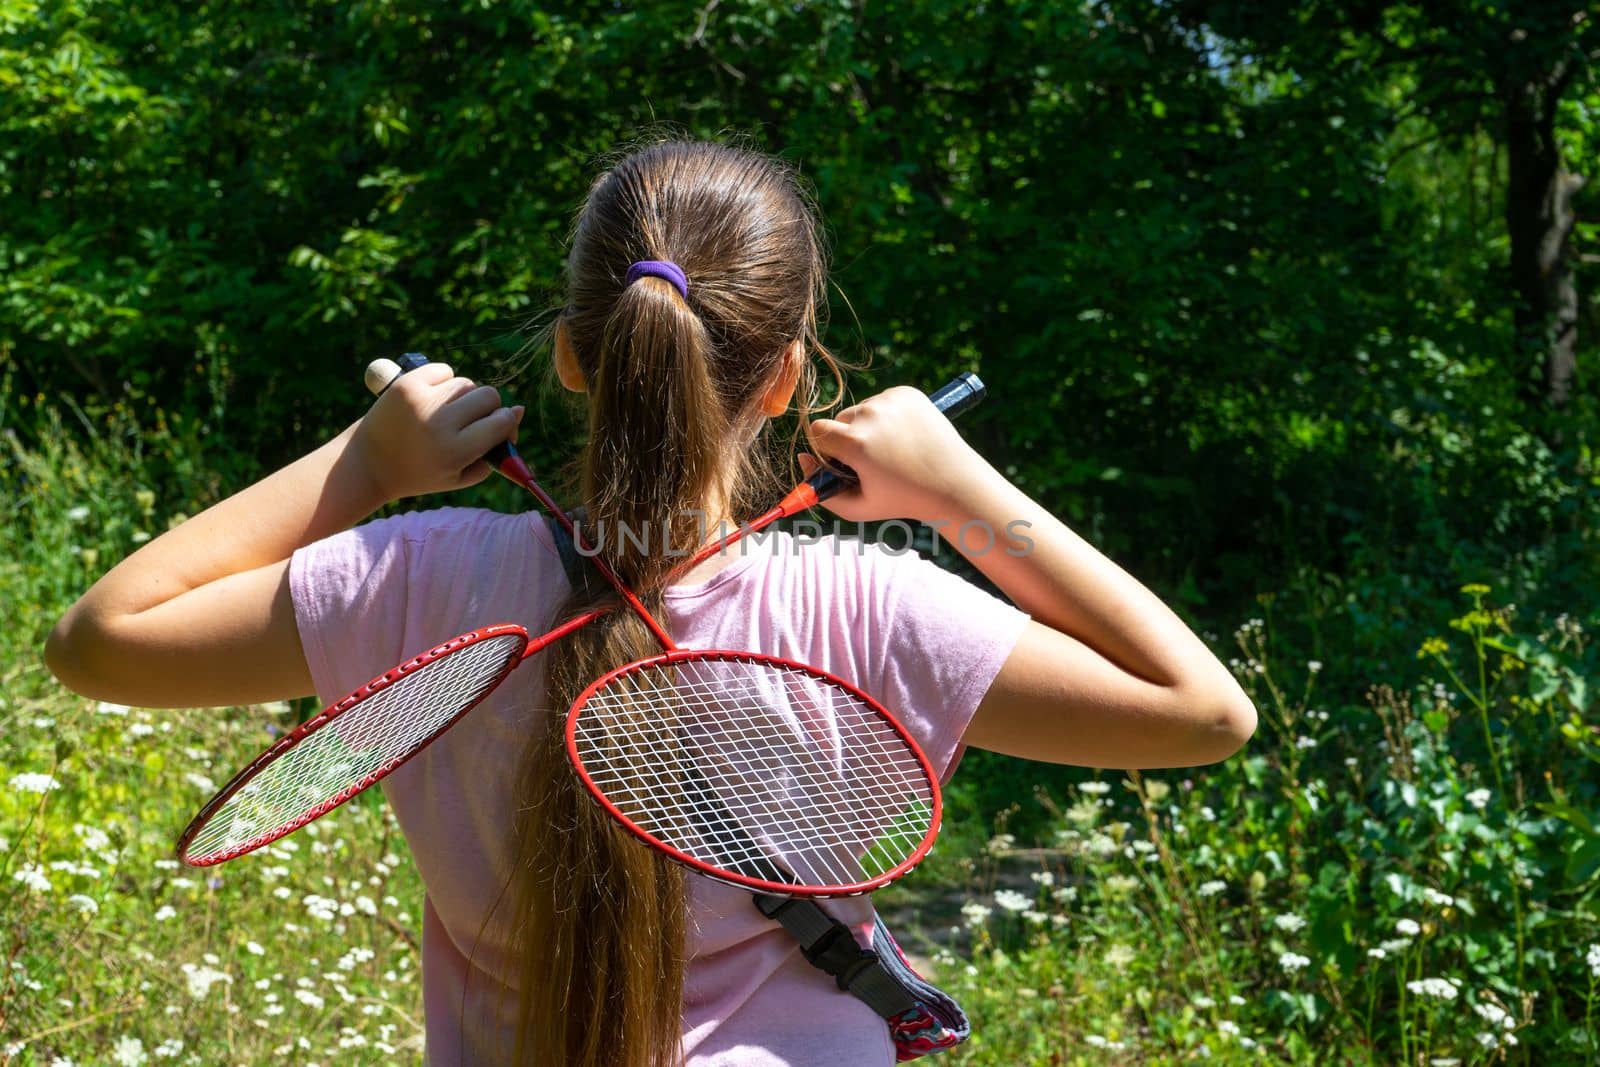 A girl stands in a forest clearing with two tennis rackets crossed on her back.